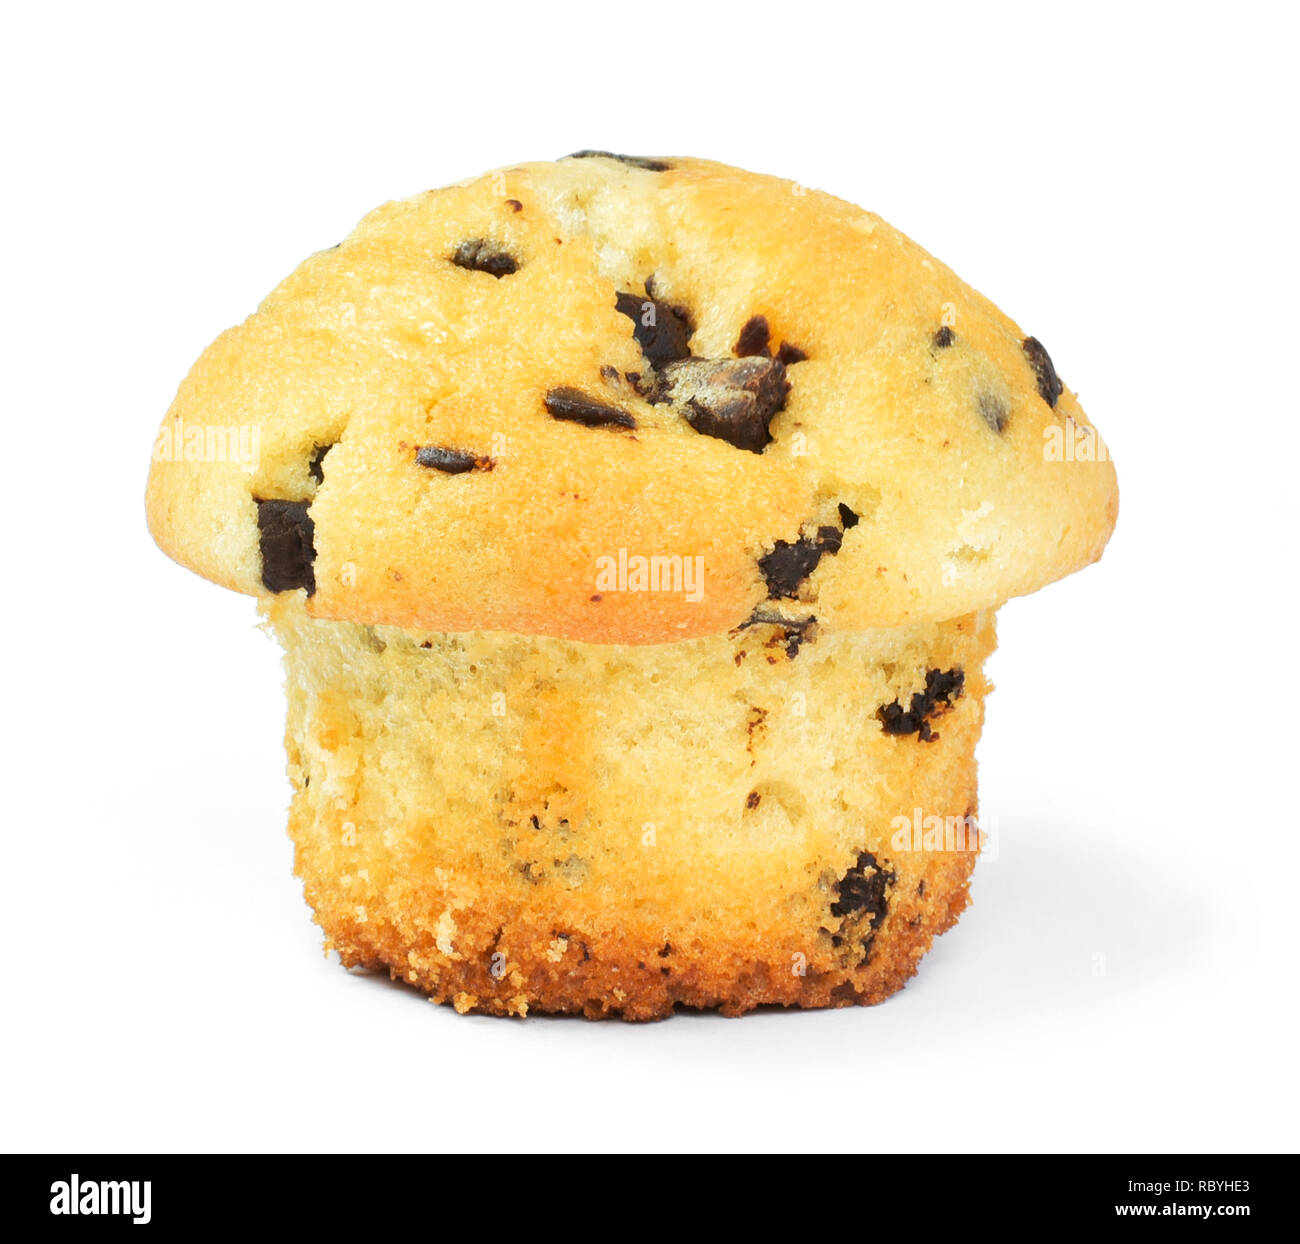 Delicious vanilla muffin or chocolate chip cupcake, isolated on white background. Muffin and paper, sweet food or unhealthy eating theme. Stock Photo